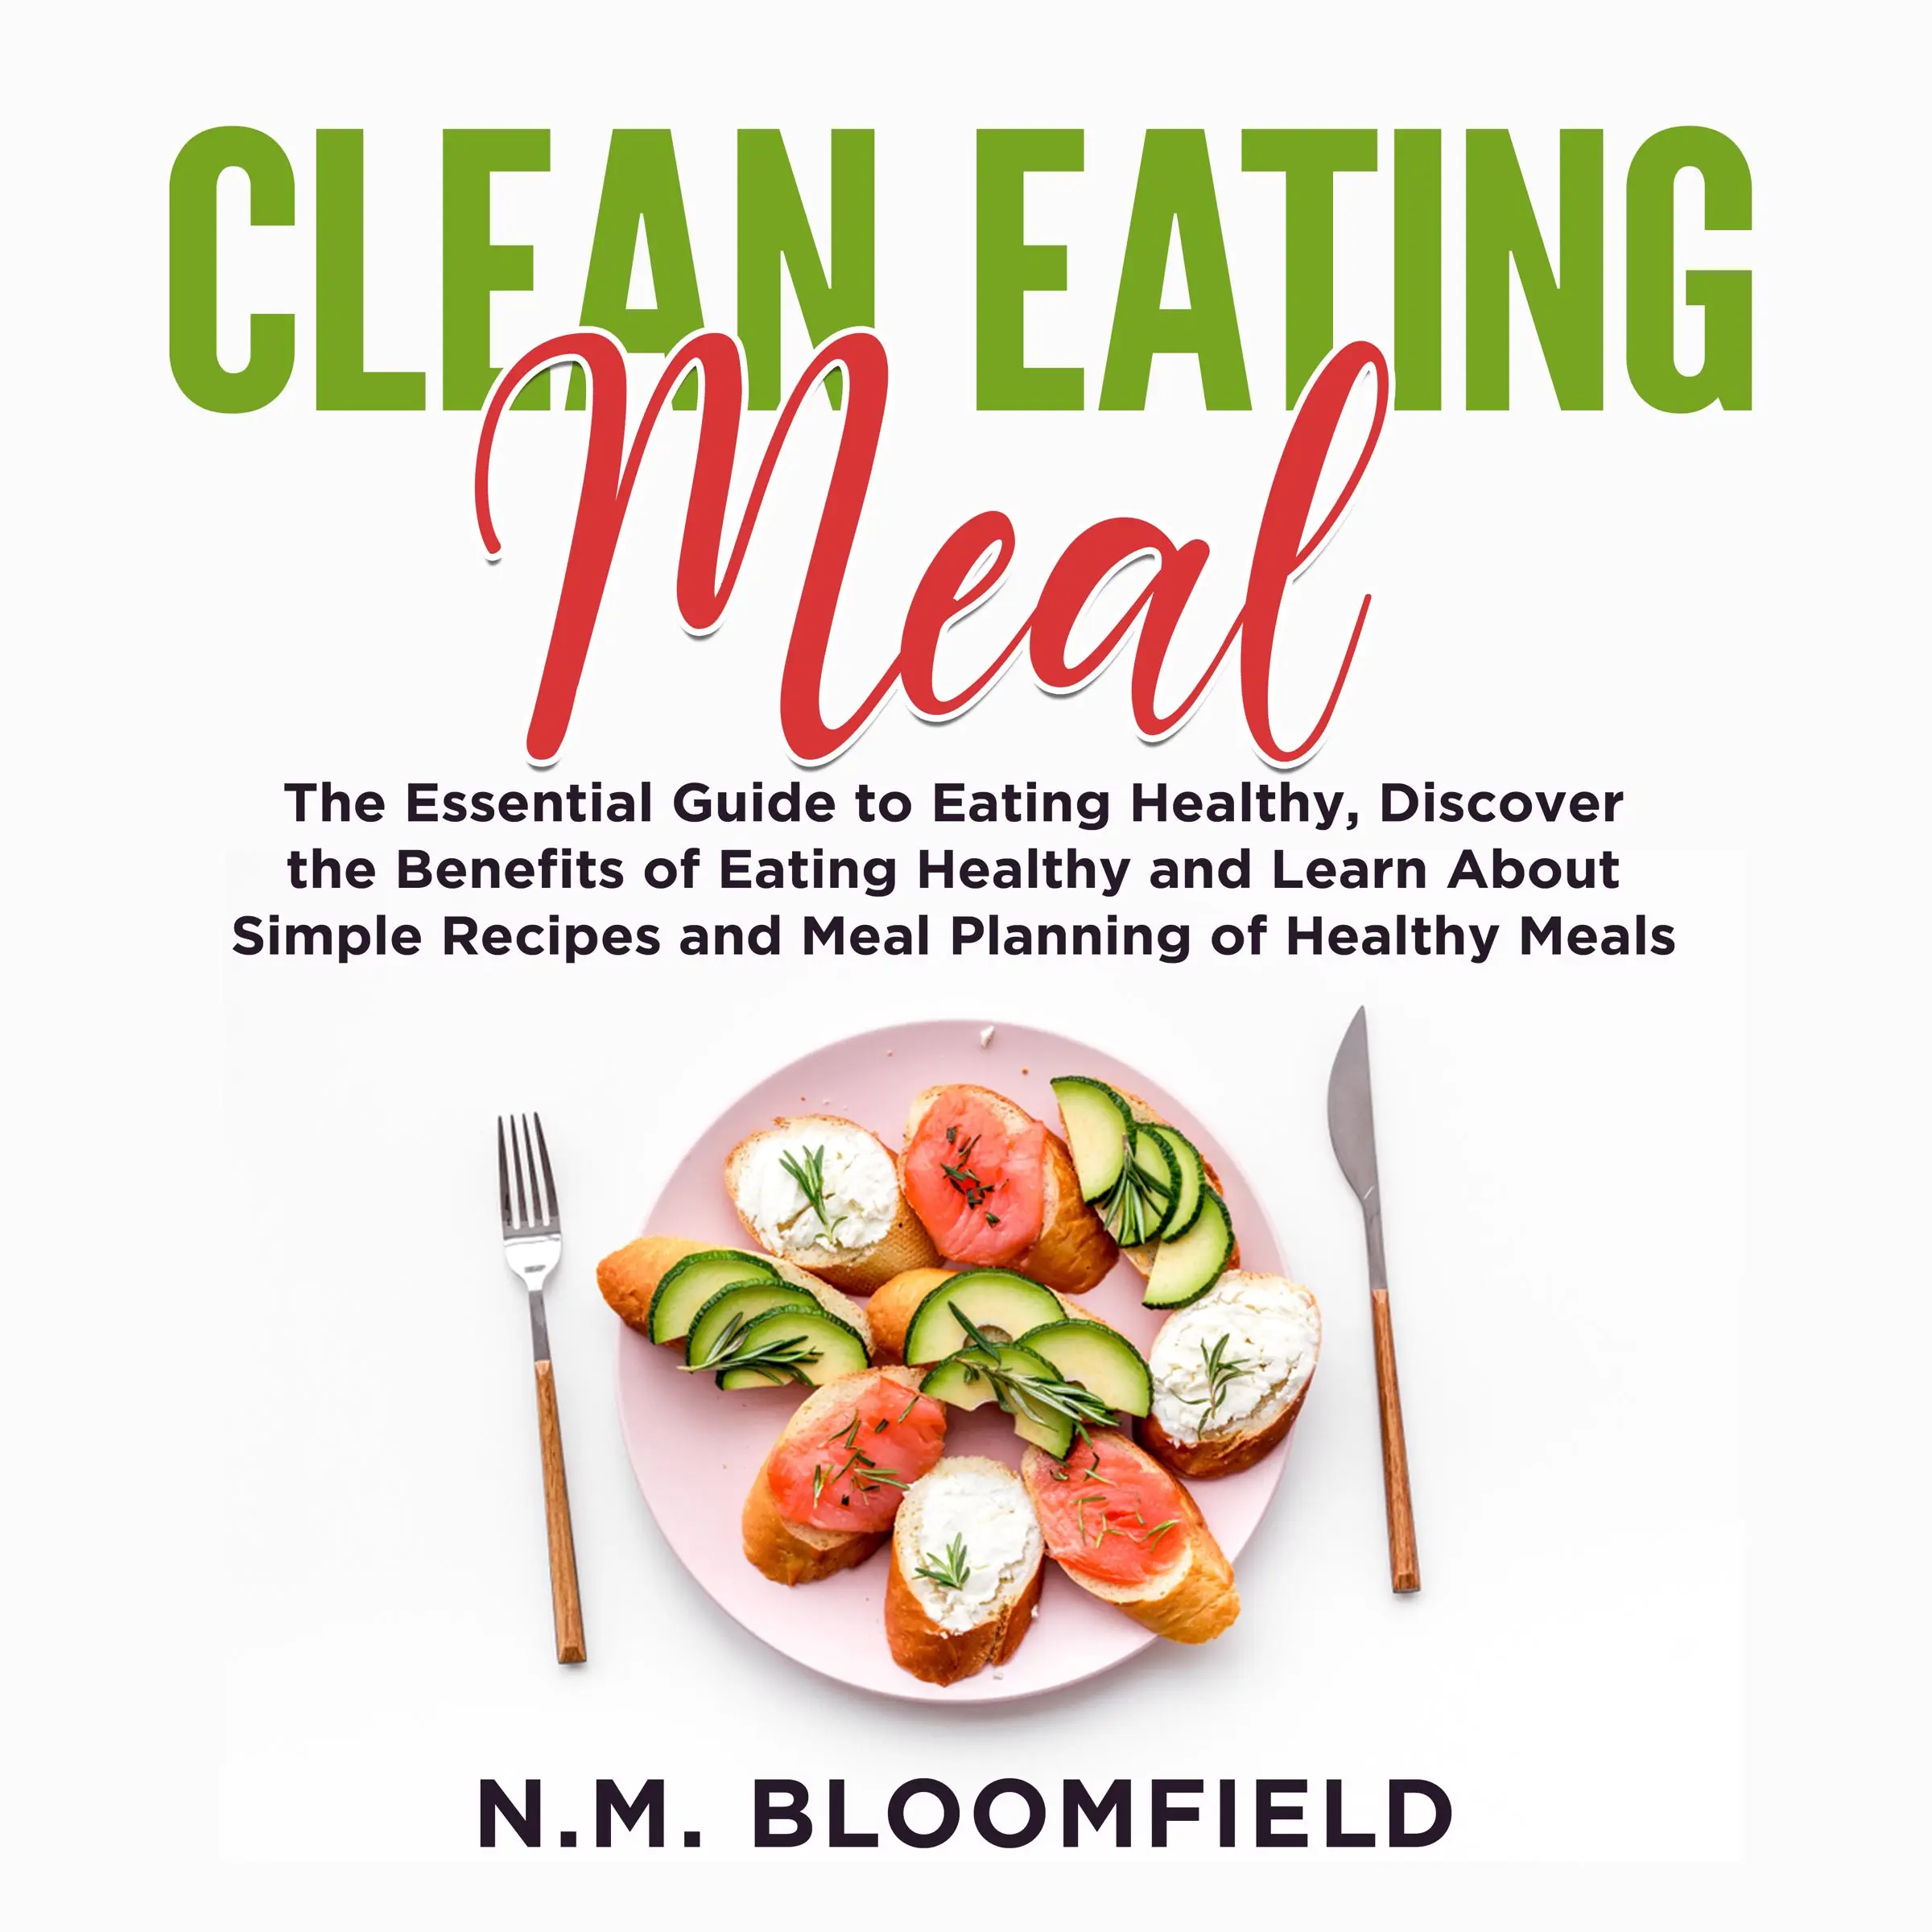 Clean Eating Meal: The Essential Guide to Eating Healthy, Discover the Benefits of Eating Healthy and Learn About Simple Recipes and Meal Planning of Healthy Meals Audiobook by N.M. Bloomfield